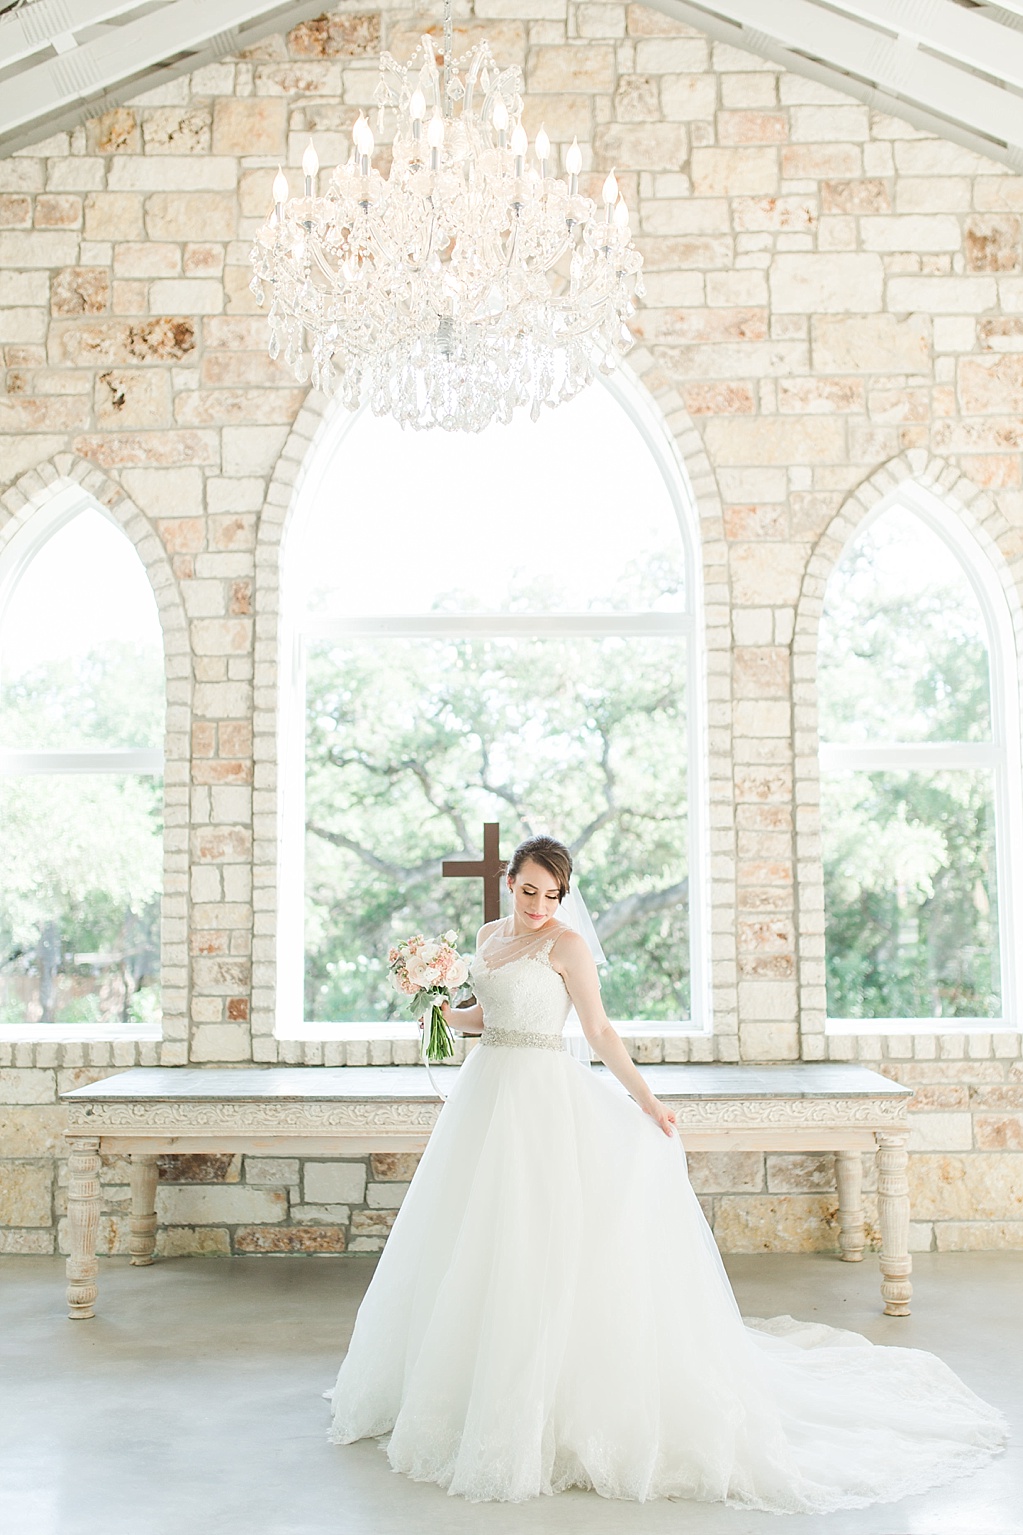 A Summer Bridal Photo Session at The Chandelier of Gruene in New Braunfels Texas By Allison Jeffers Wedding Photography 0020